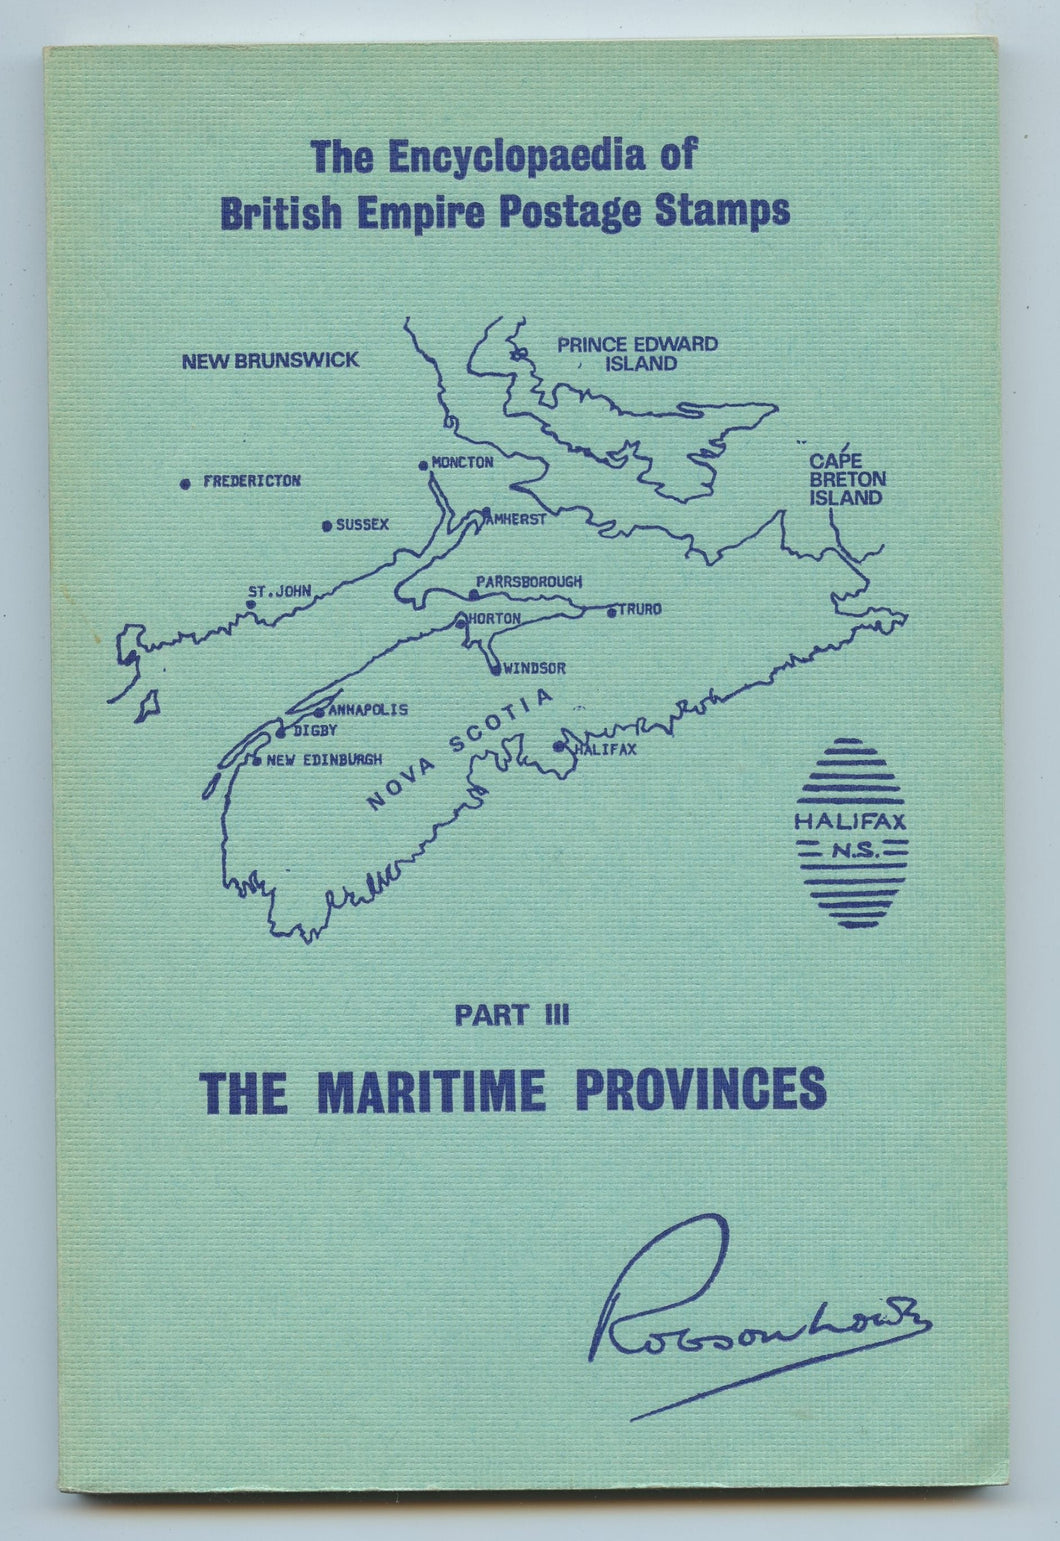 The Encyclopaedia of British Empire Postage Stamps. Part III: The Maritime Provinces